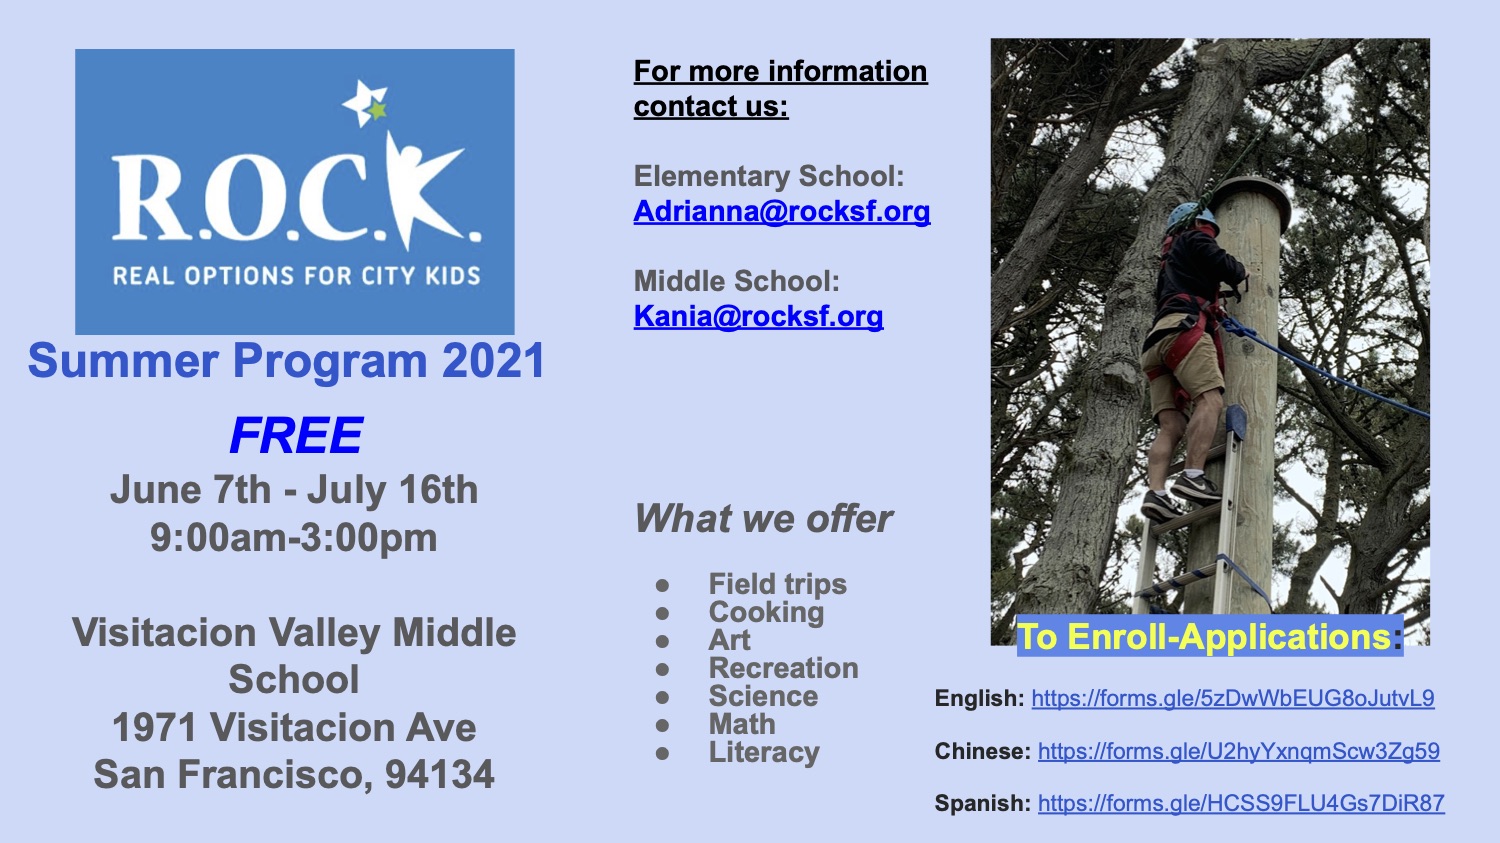 a flyer with a light blue background with a picture of a person climbing a pole. It also has details about the R.O.C.K. summer program